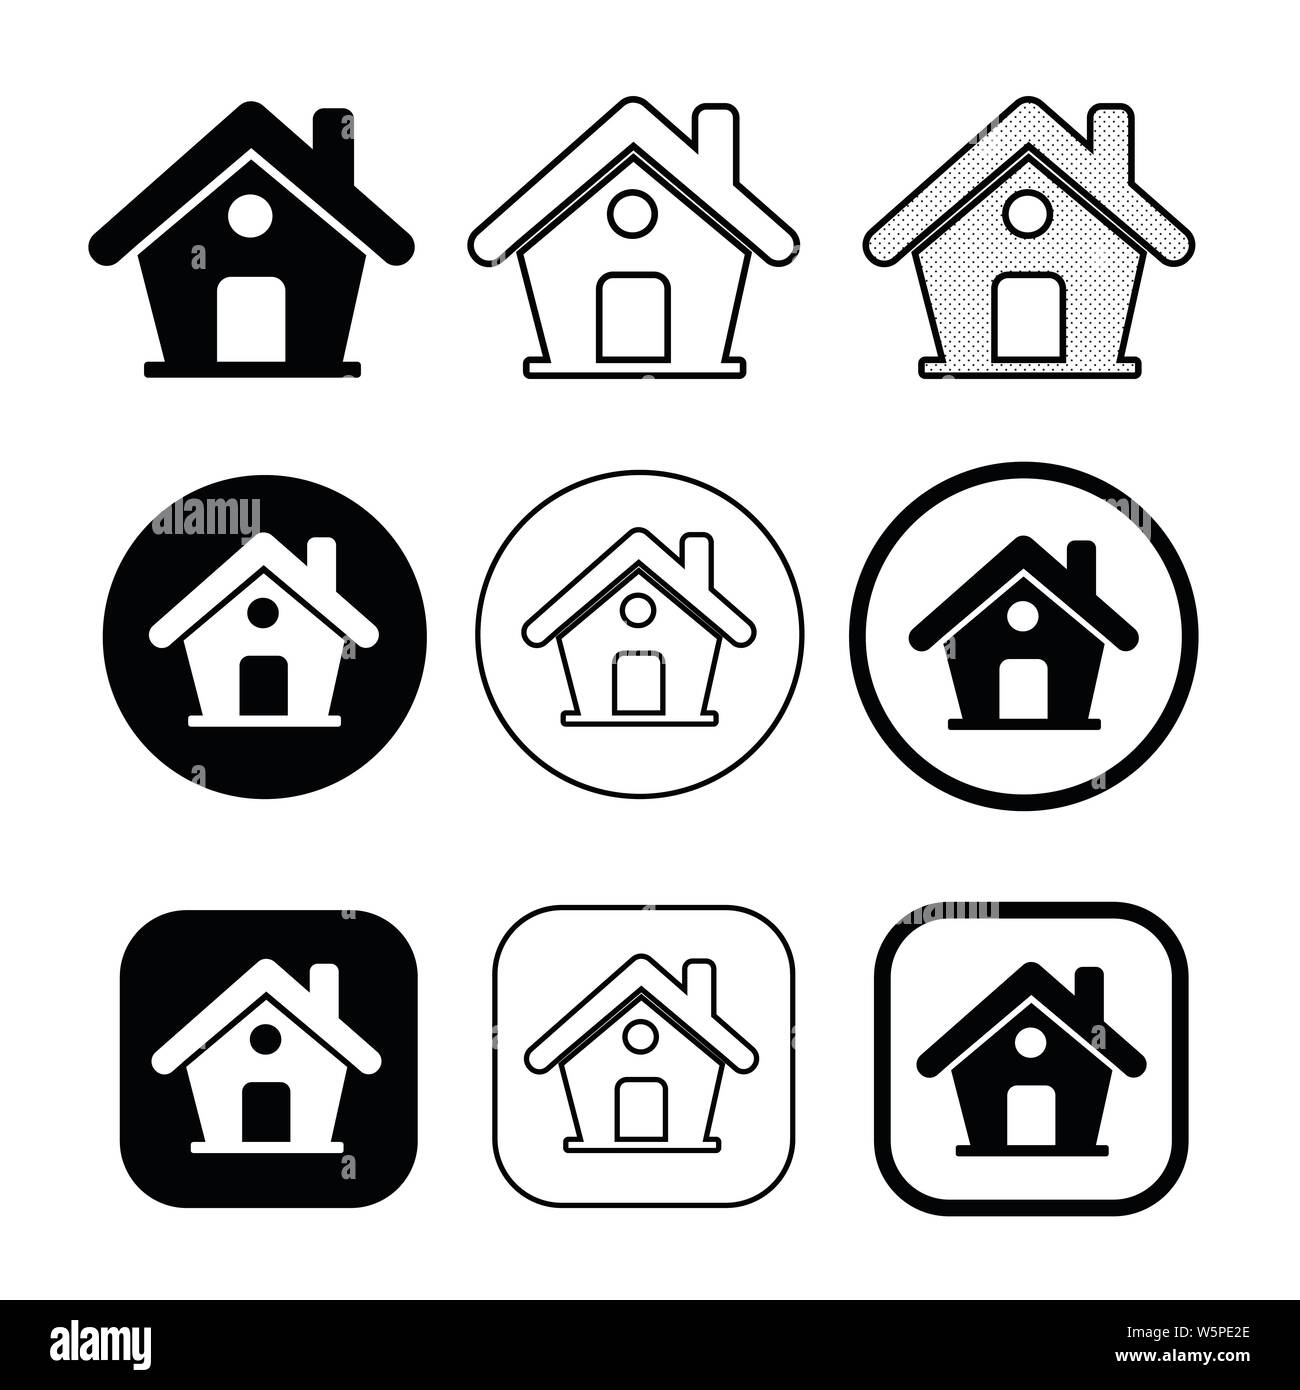 simple house symbol and home icon sign Stock Vector